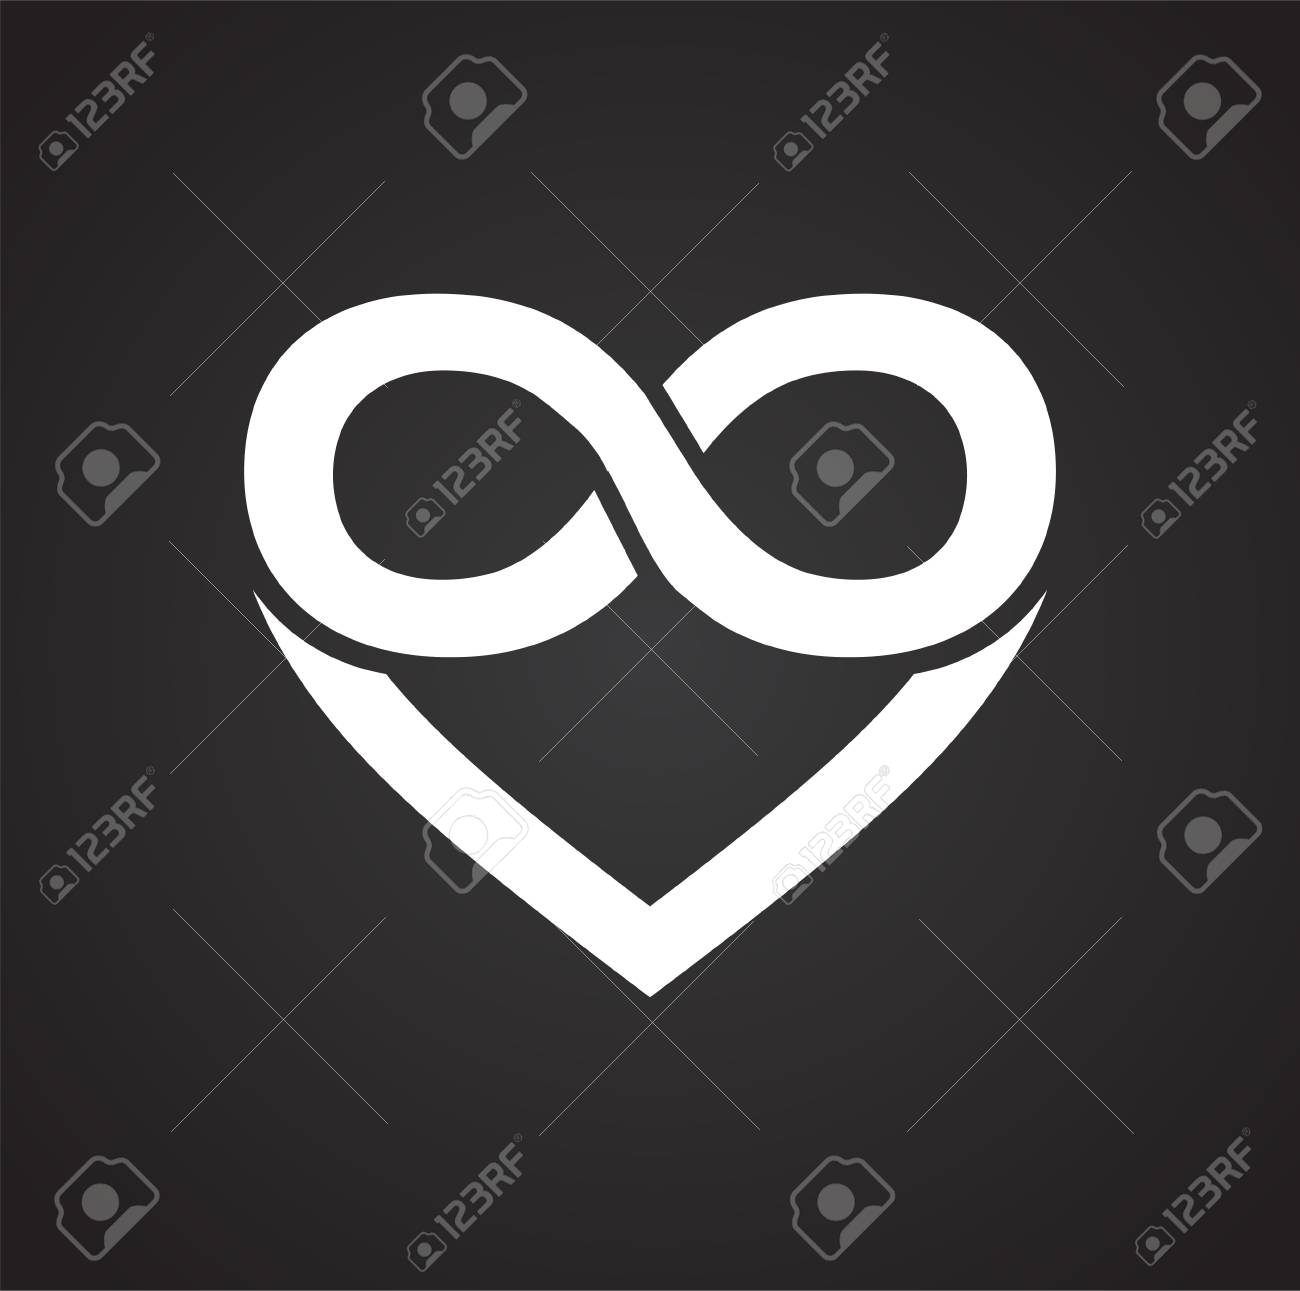 Heart Infiniti Symbol Icon On Black Background For Graphic And